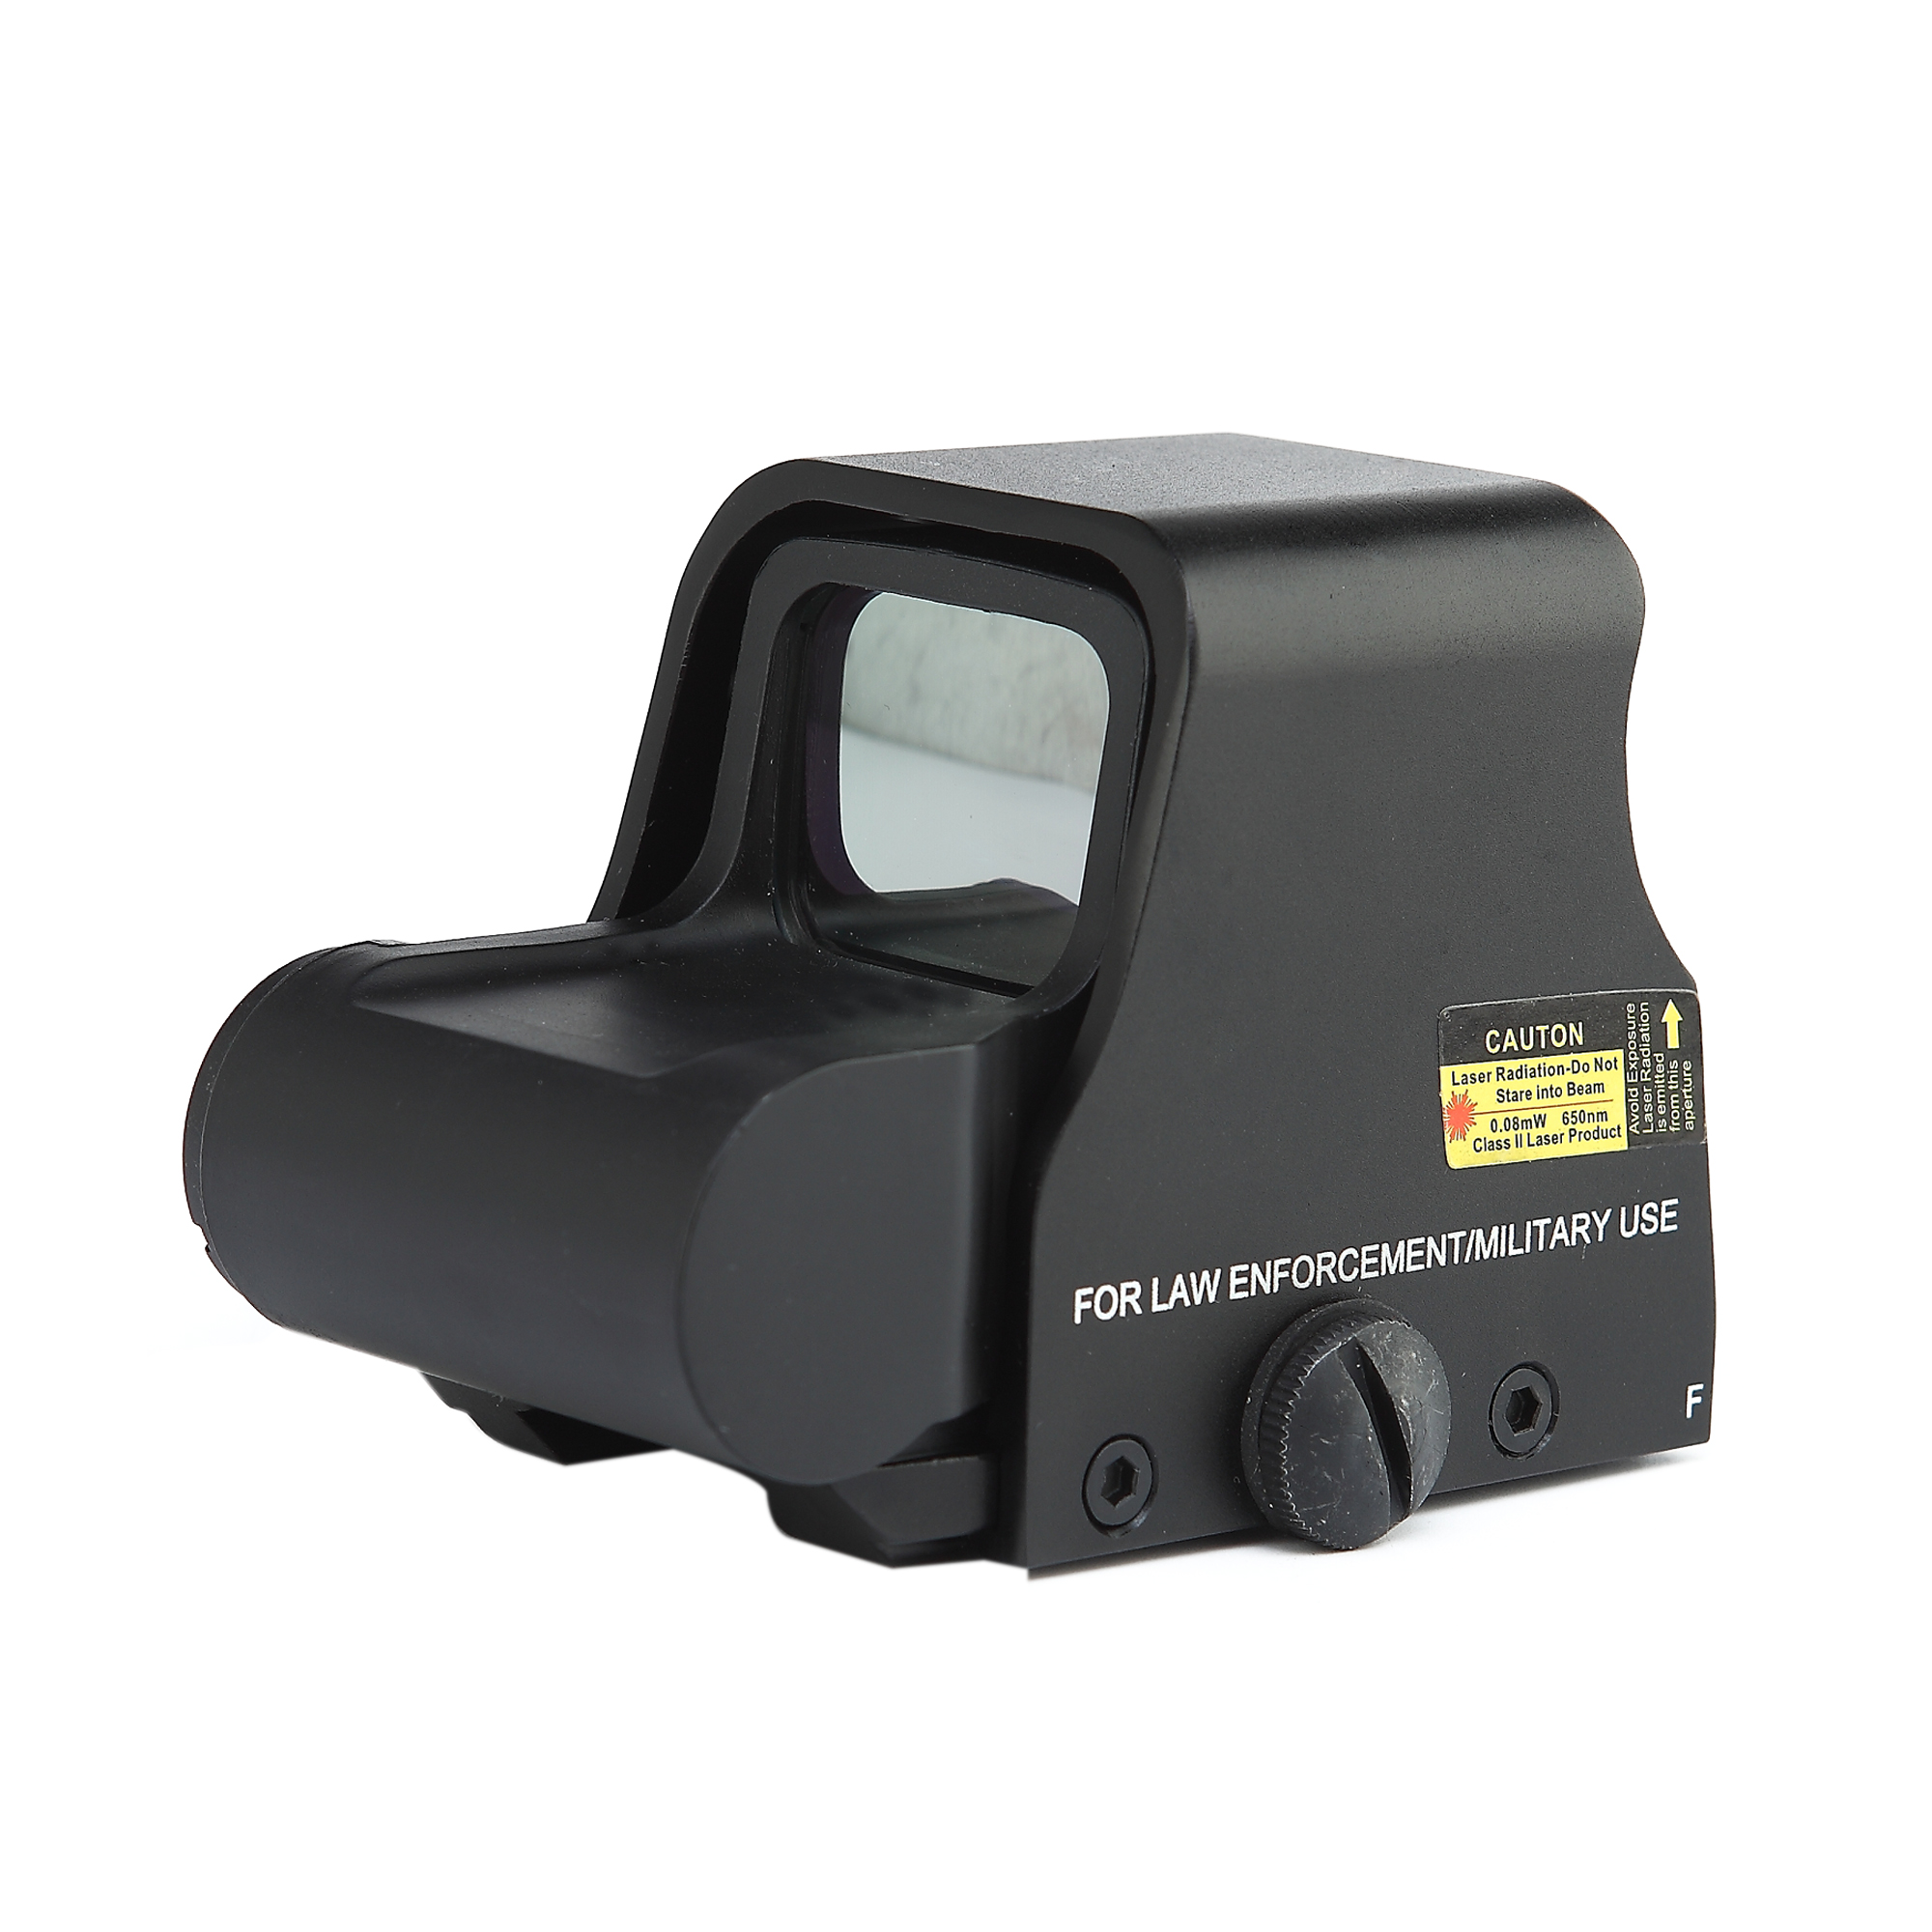  Sight Green Light Dot Sight Sturdy Easy to Install Holographic Sight View Holographic Sight Wearable and Durable 